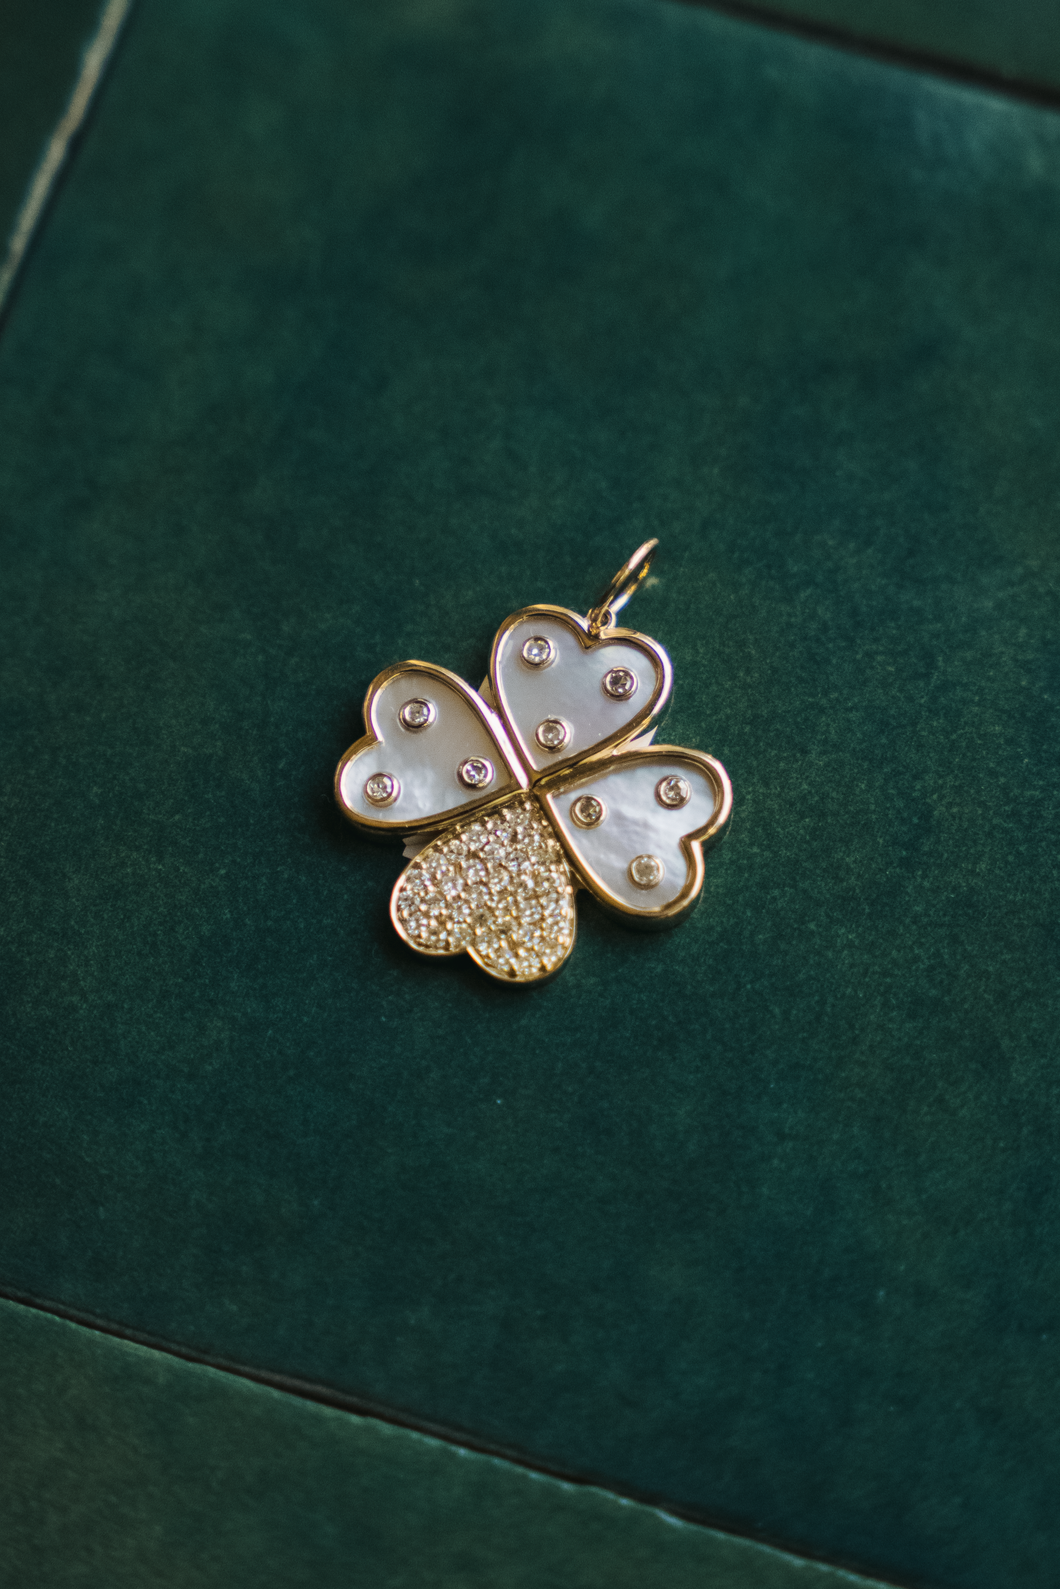 14K GOLD CHARM, MOTHER OF PEARL CLOVER WITH DIAMONDS